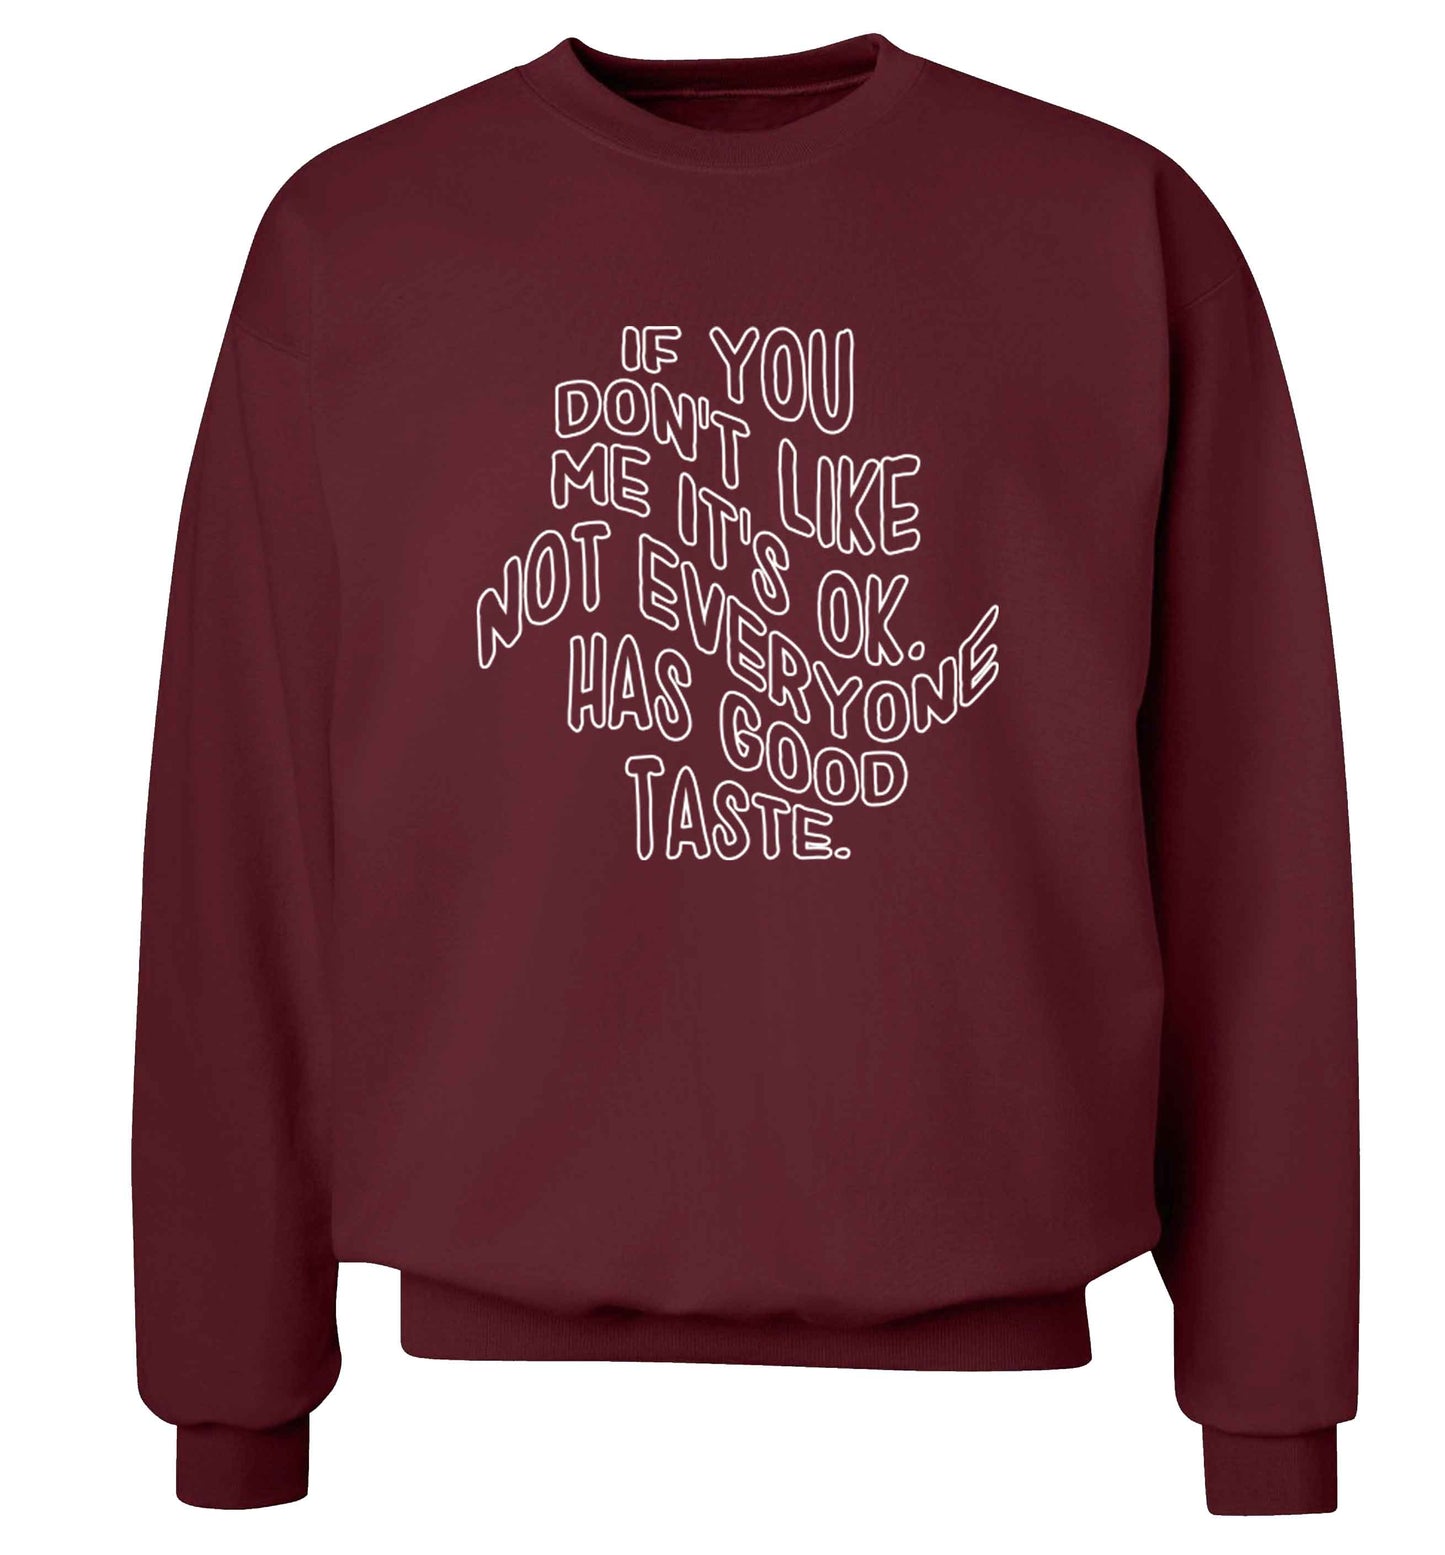 If you don't like me it's ok not everyone has good taste adult's unisex maroon sweater 2XL